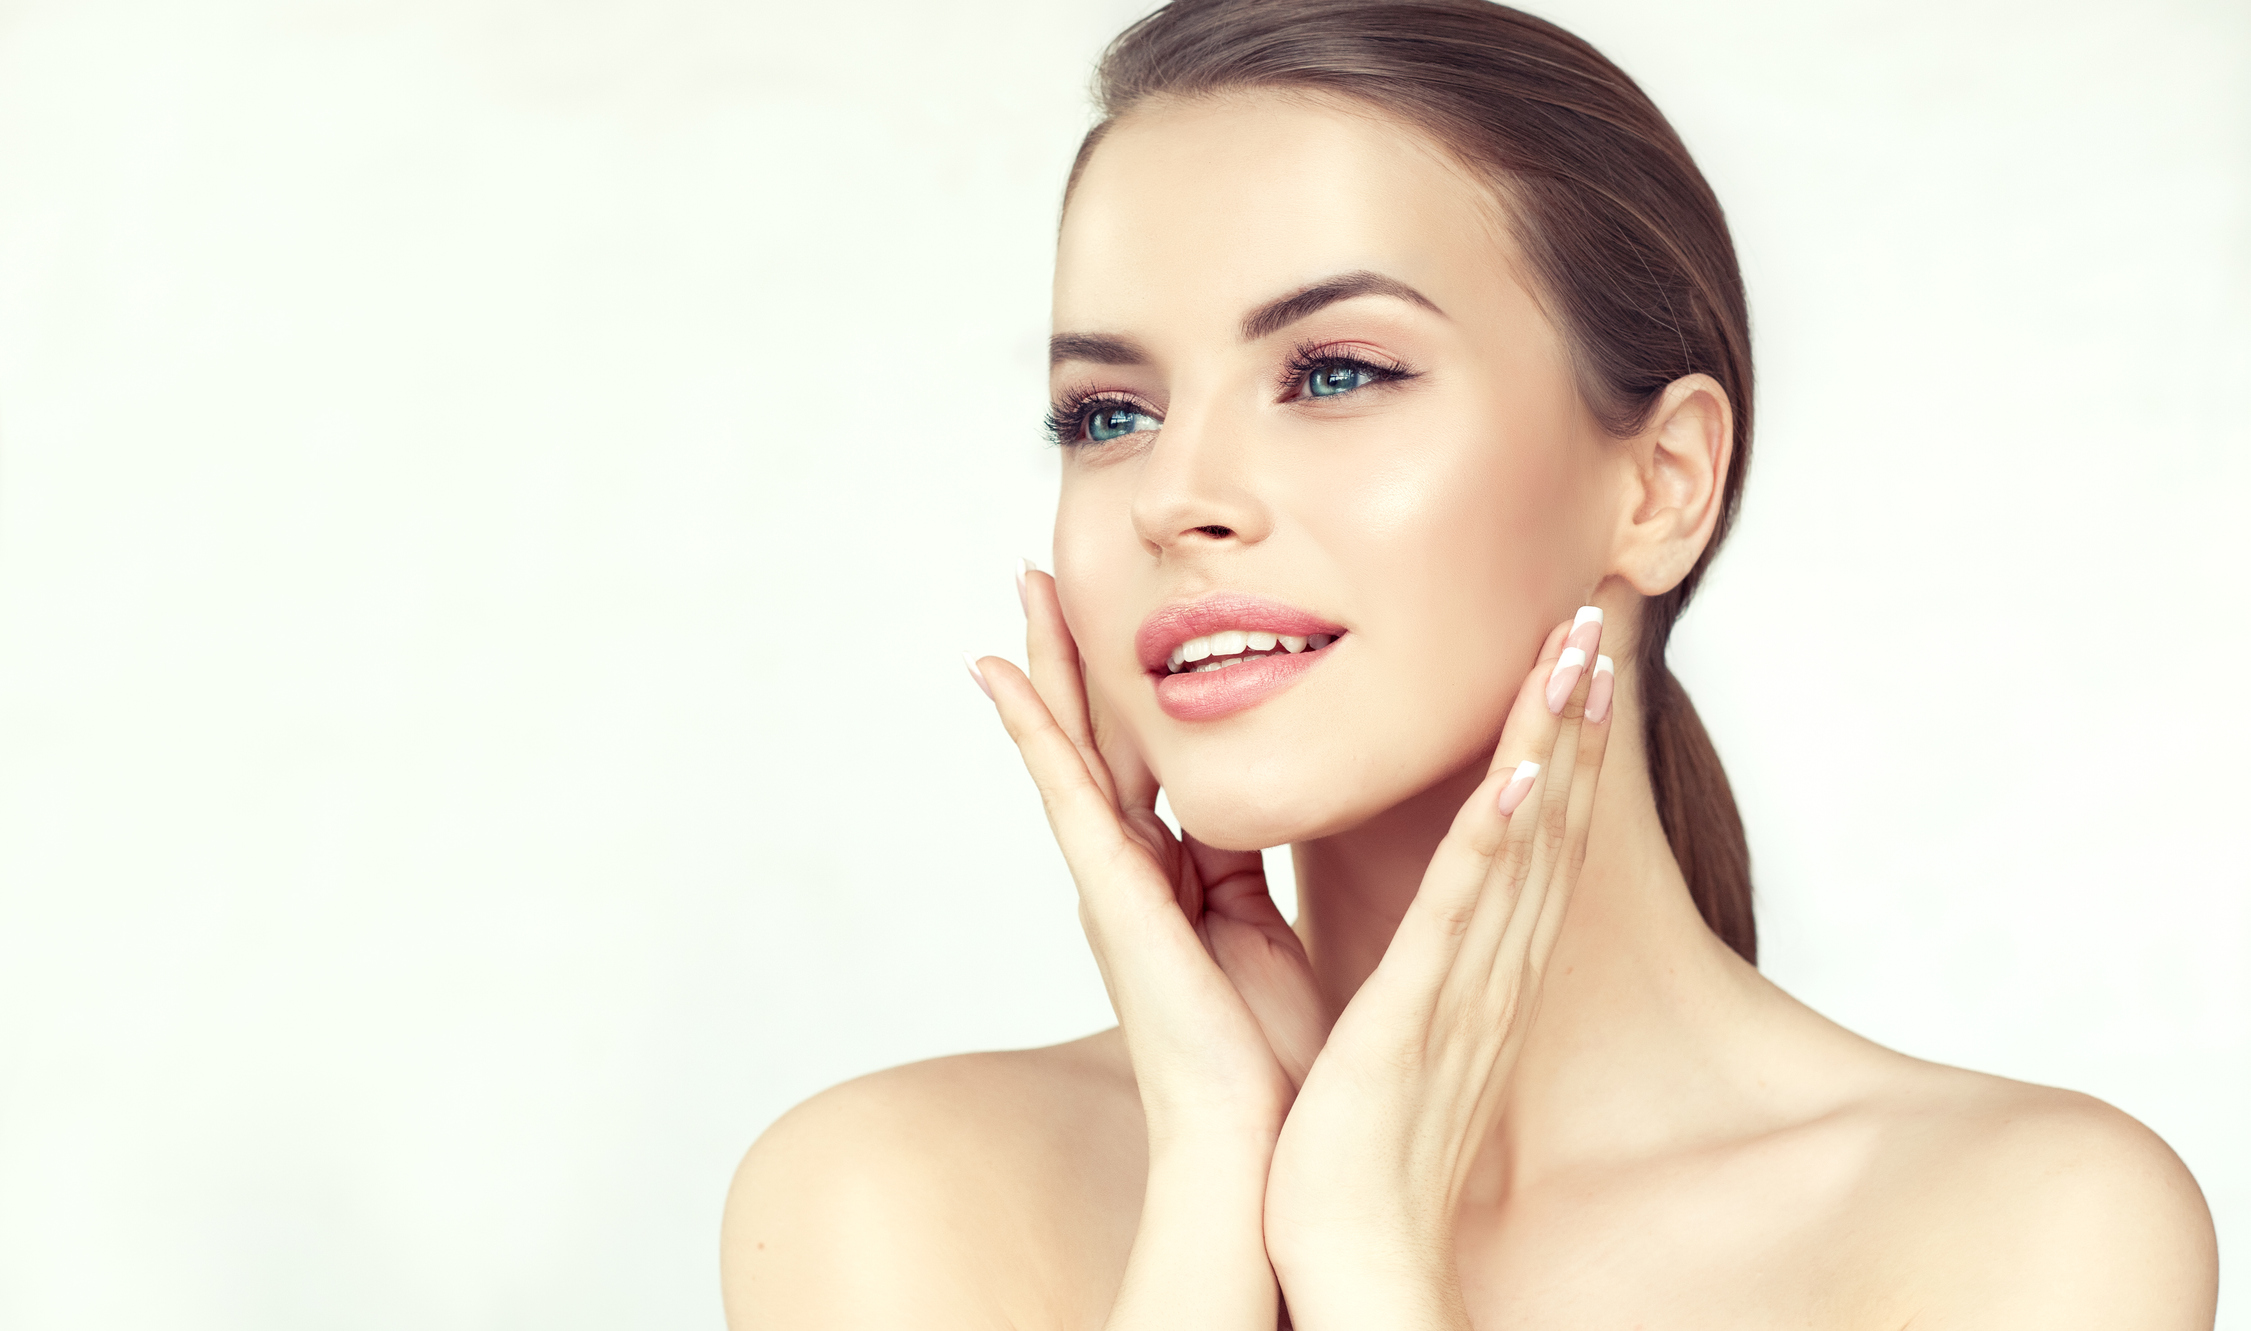 Rousso Adams Facial Plastic Surgery Blog | Non Surgical Jaw Contouring 101